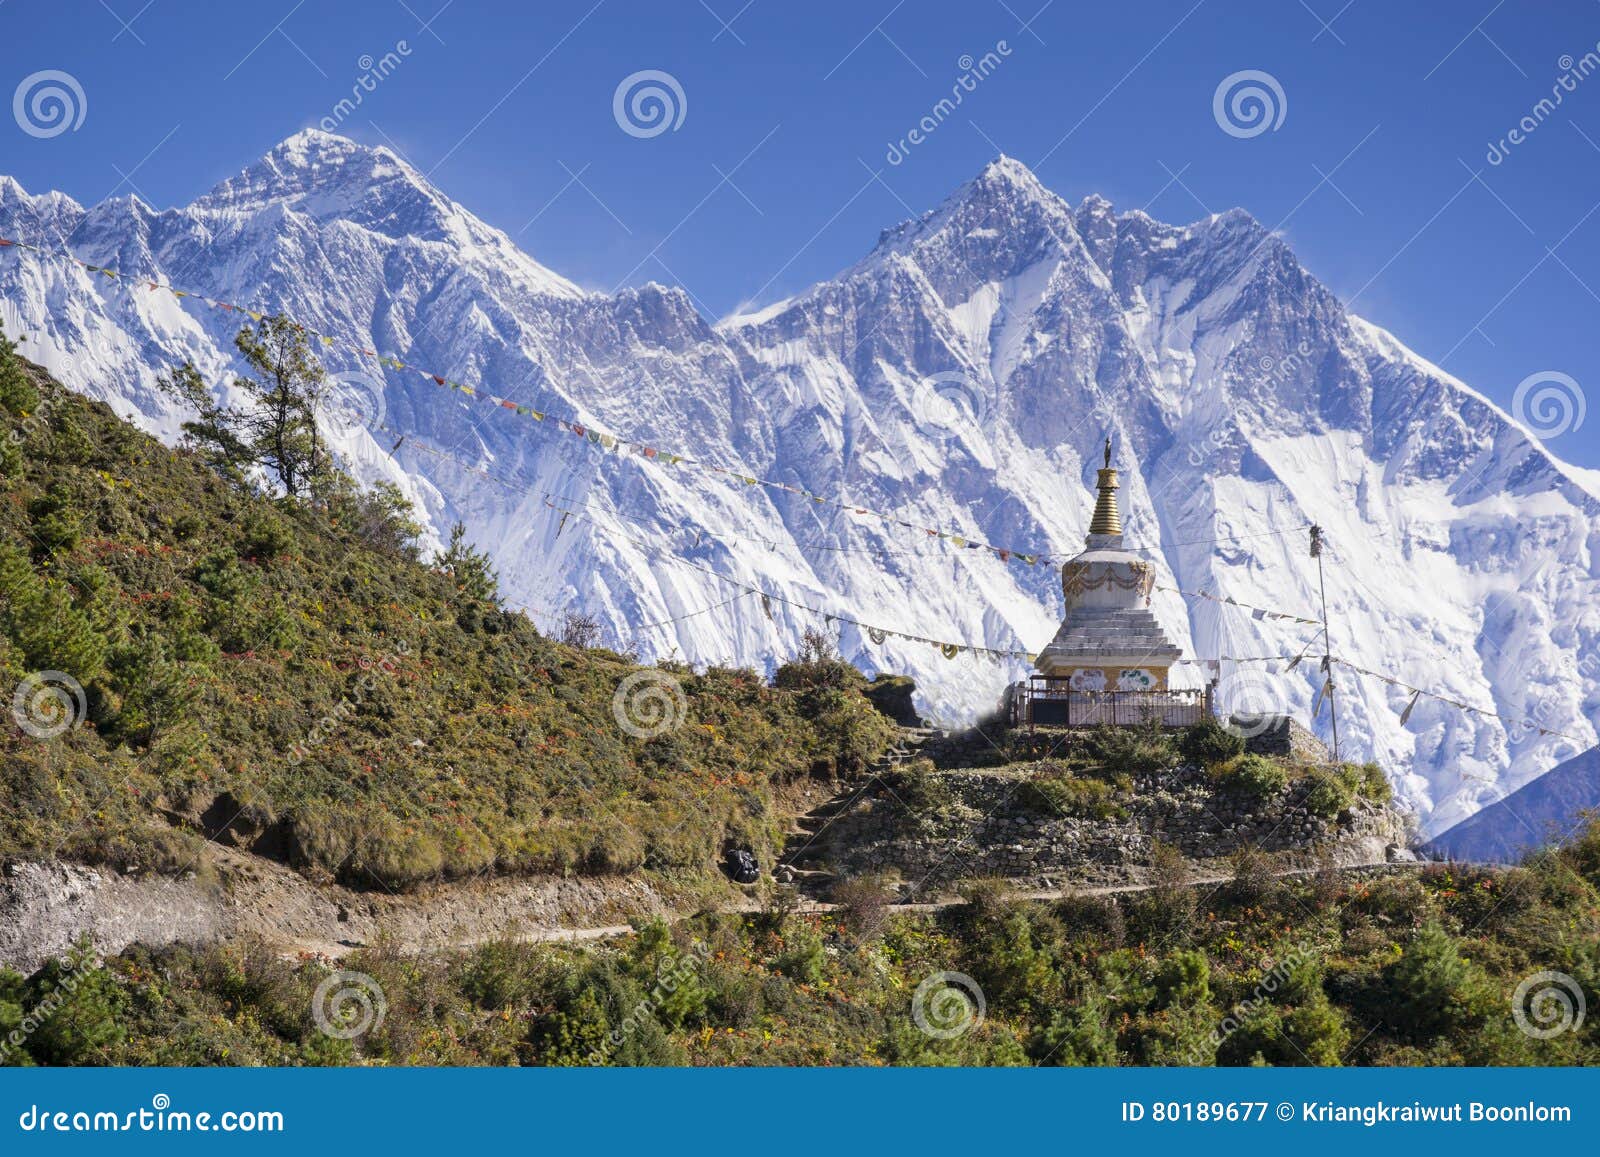 view of a buddhist stupa with mountain lhotse and ama dablam behind on the way from namche bazaar to tengboche.